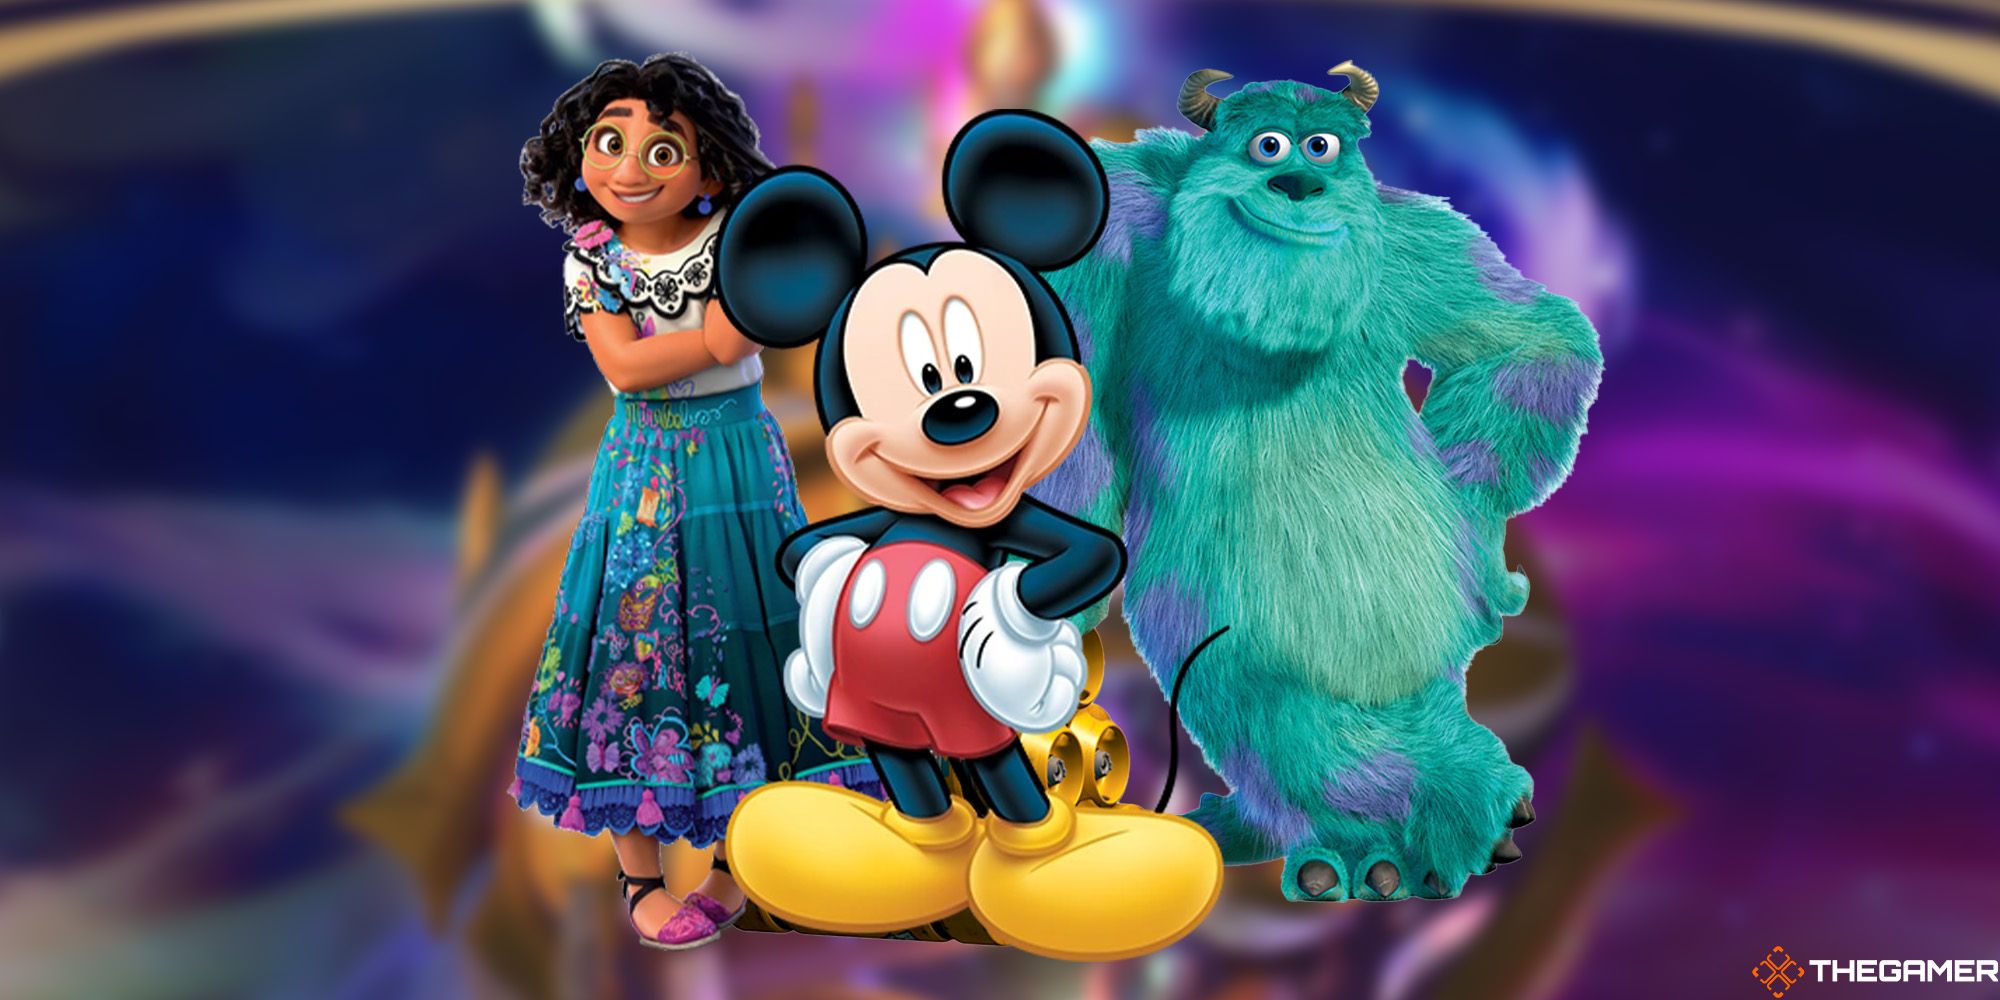 Sulley, Mirabel, and Mickey